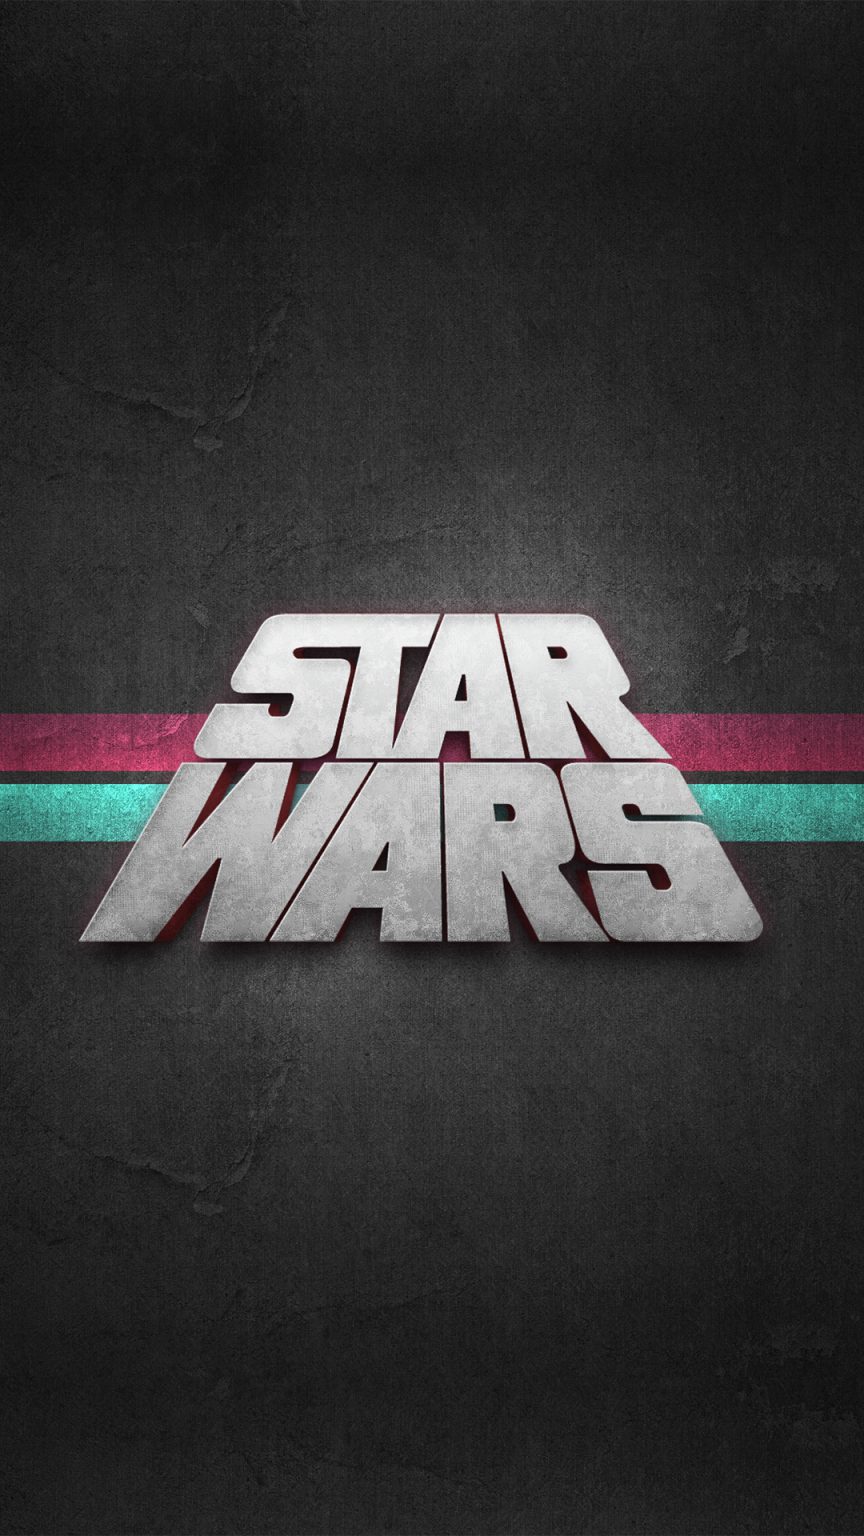 Star Wars Poster Android Wallpaper